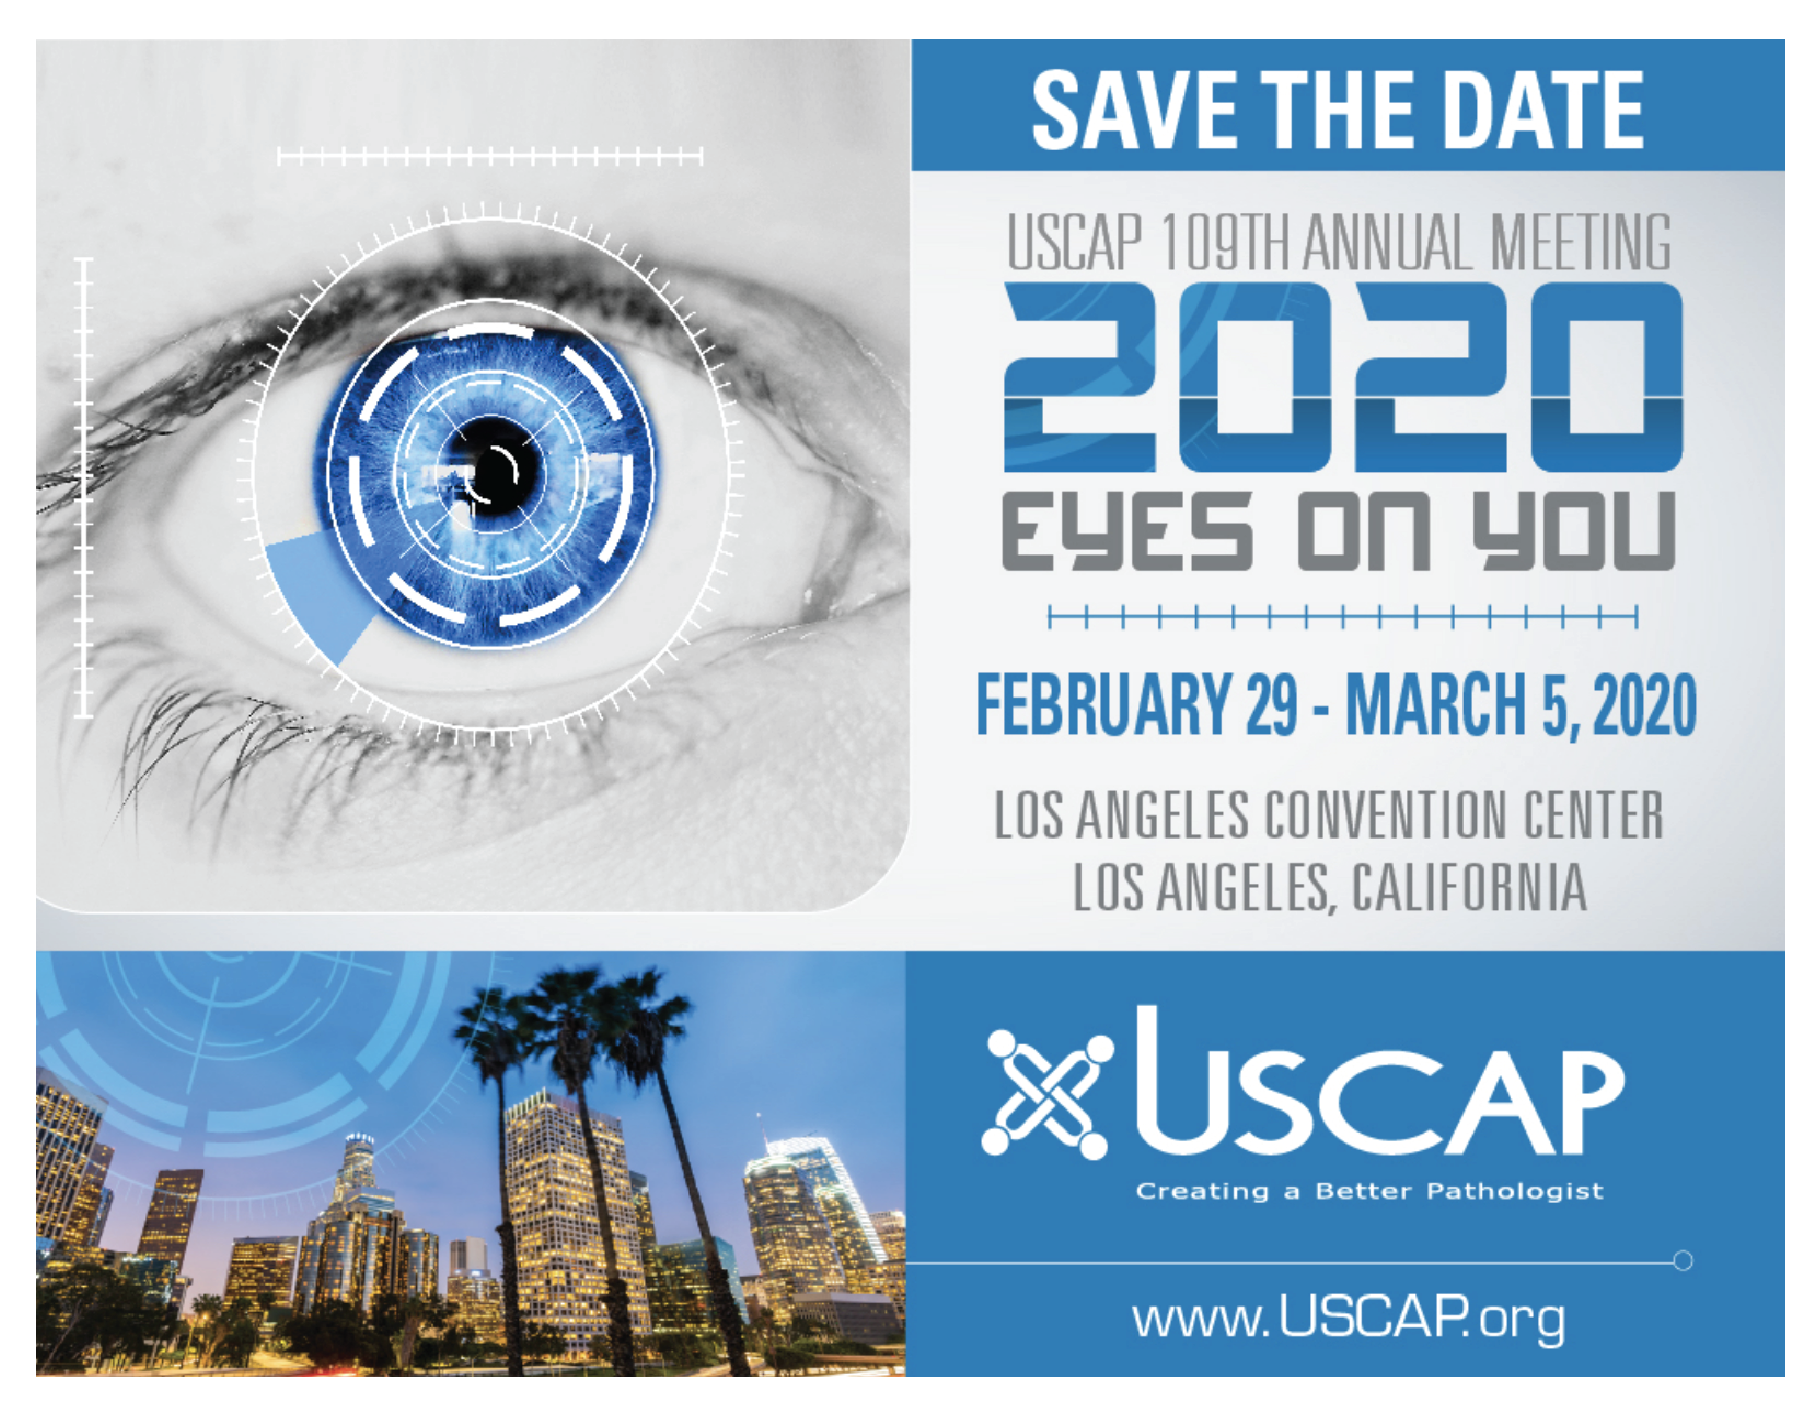 The USCAP 109th Annual Meeting - Los Angeles, California